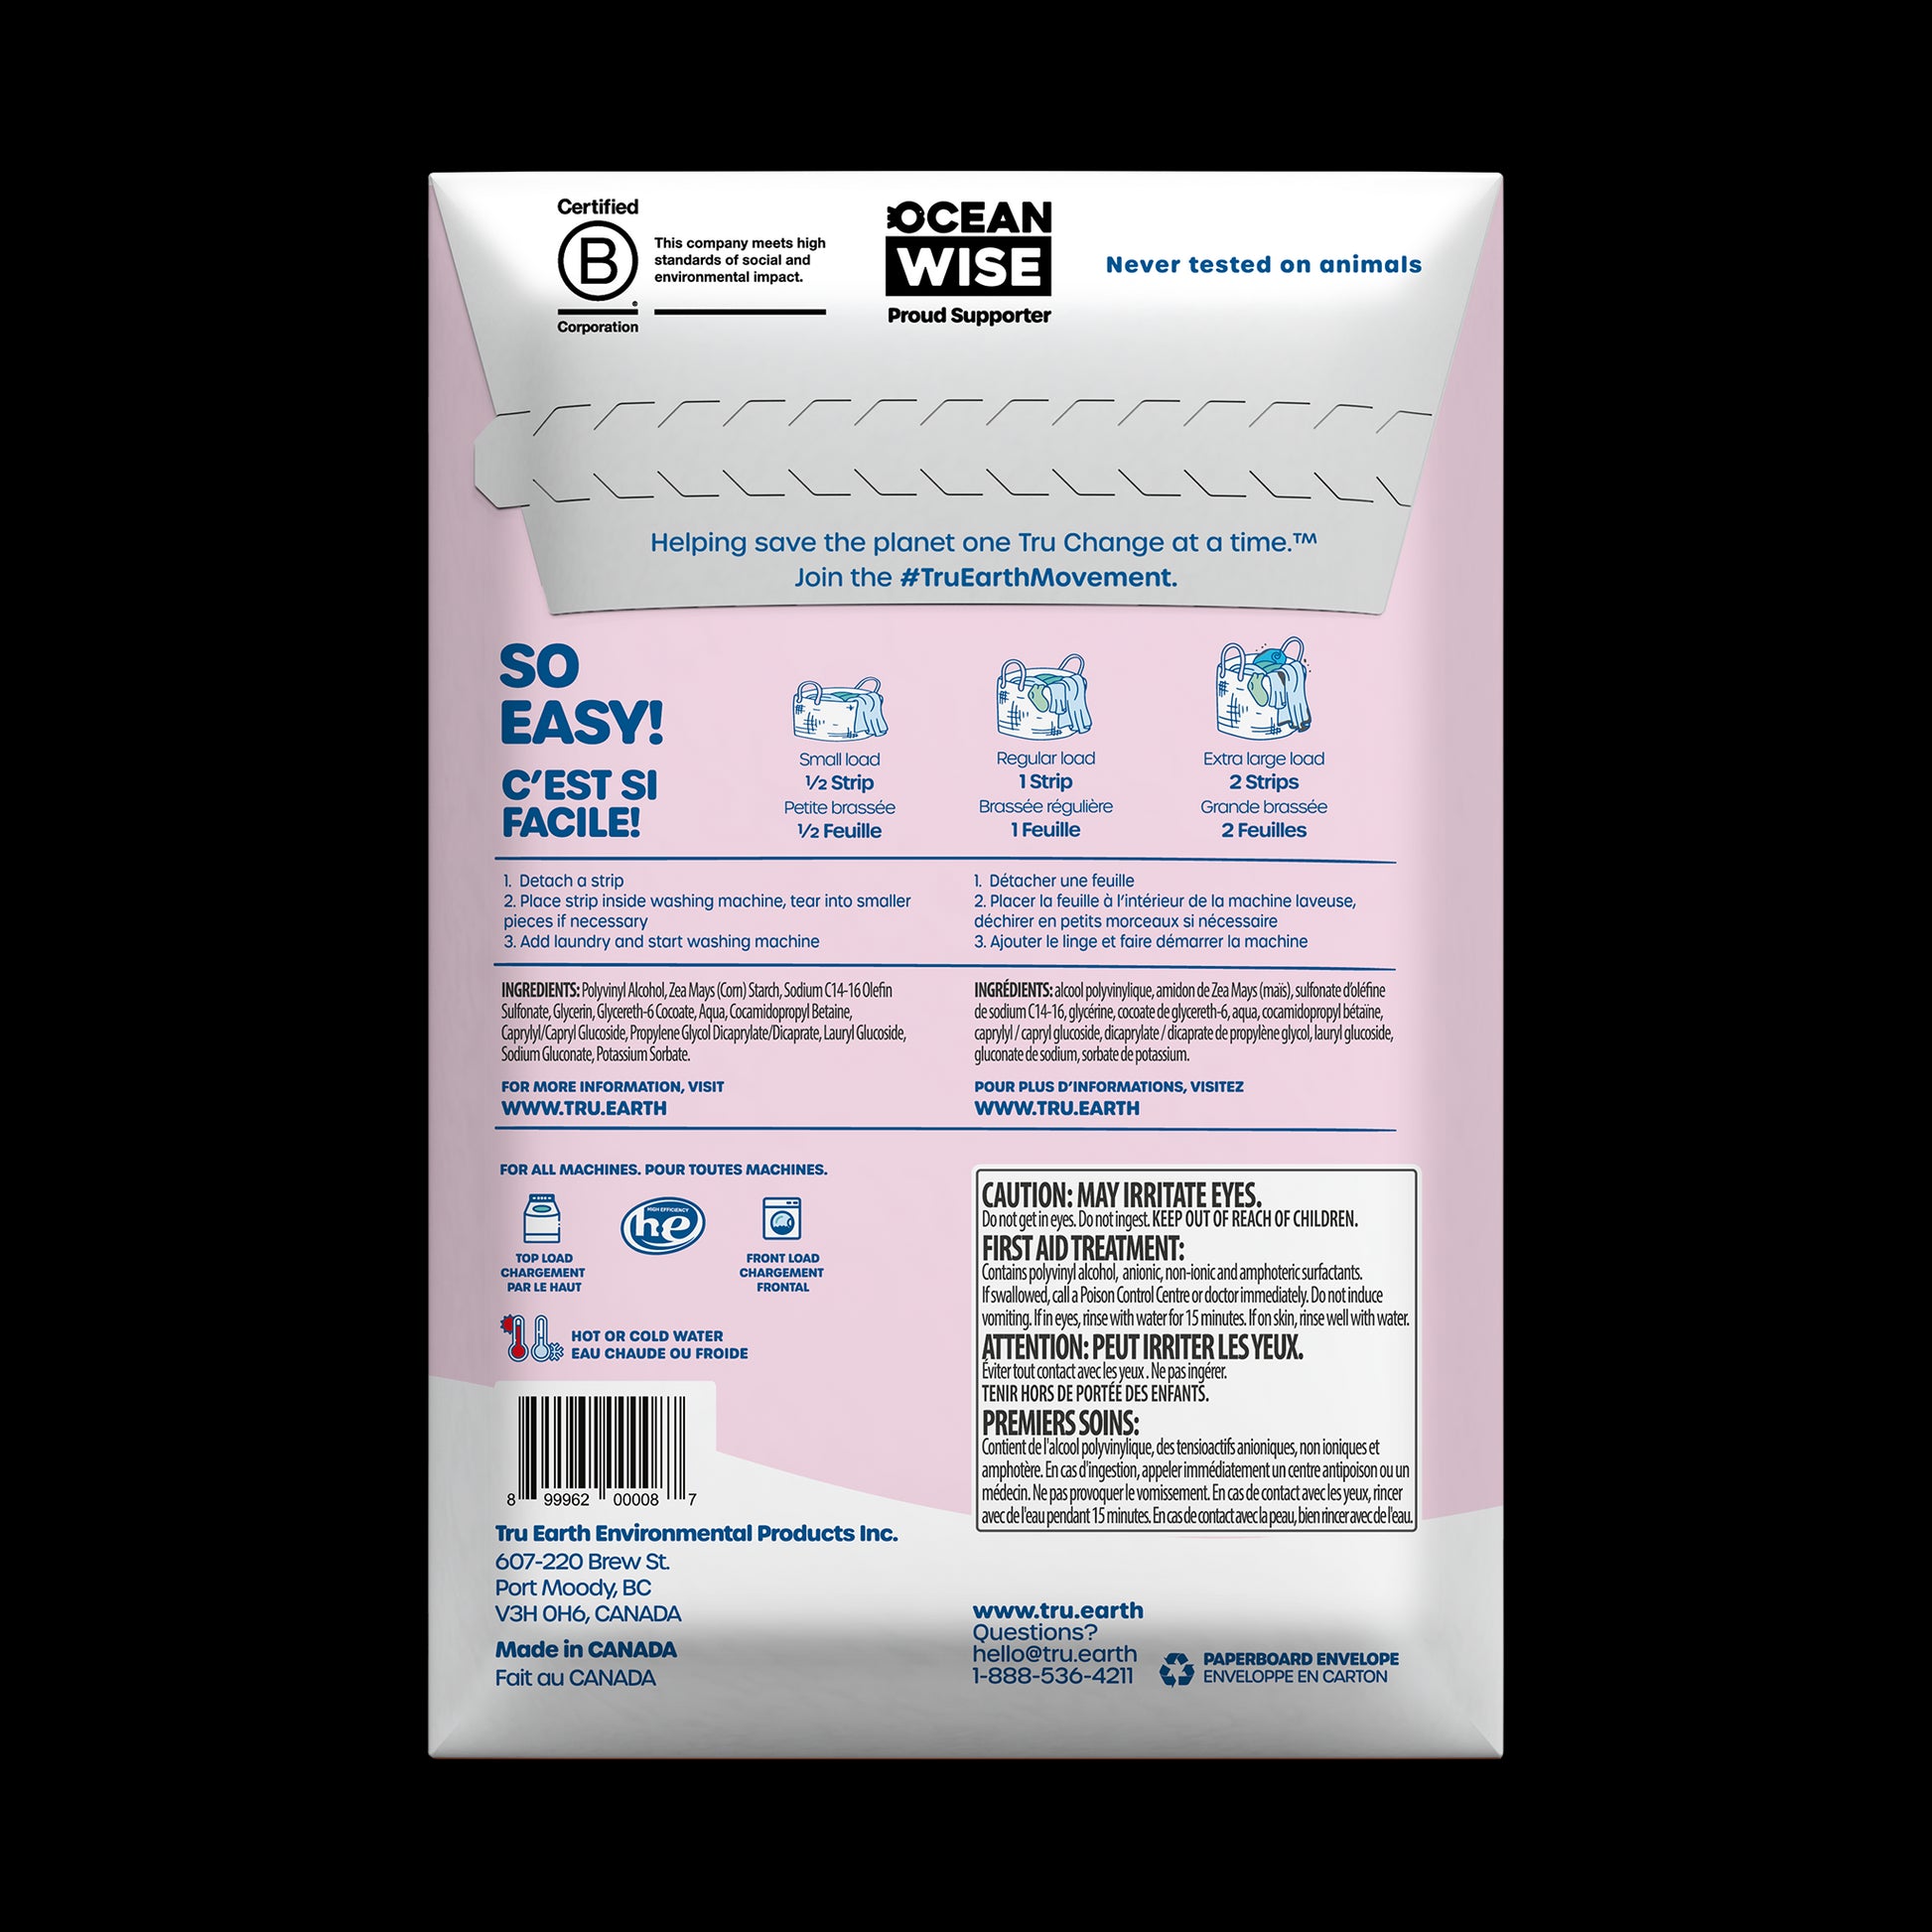 TruEarth Laundry Detergent Baby Fragrance-Free Back of Package